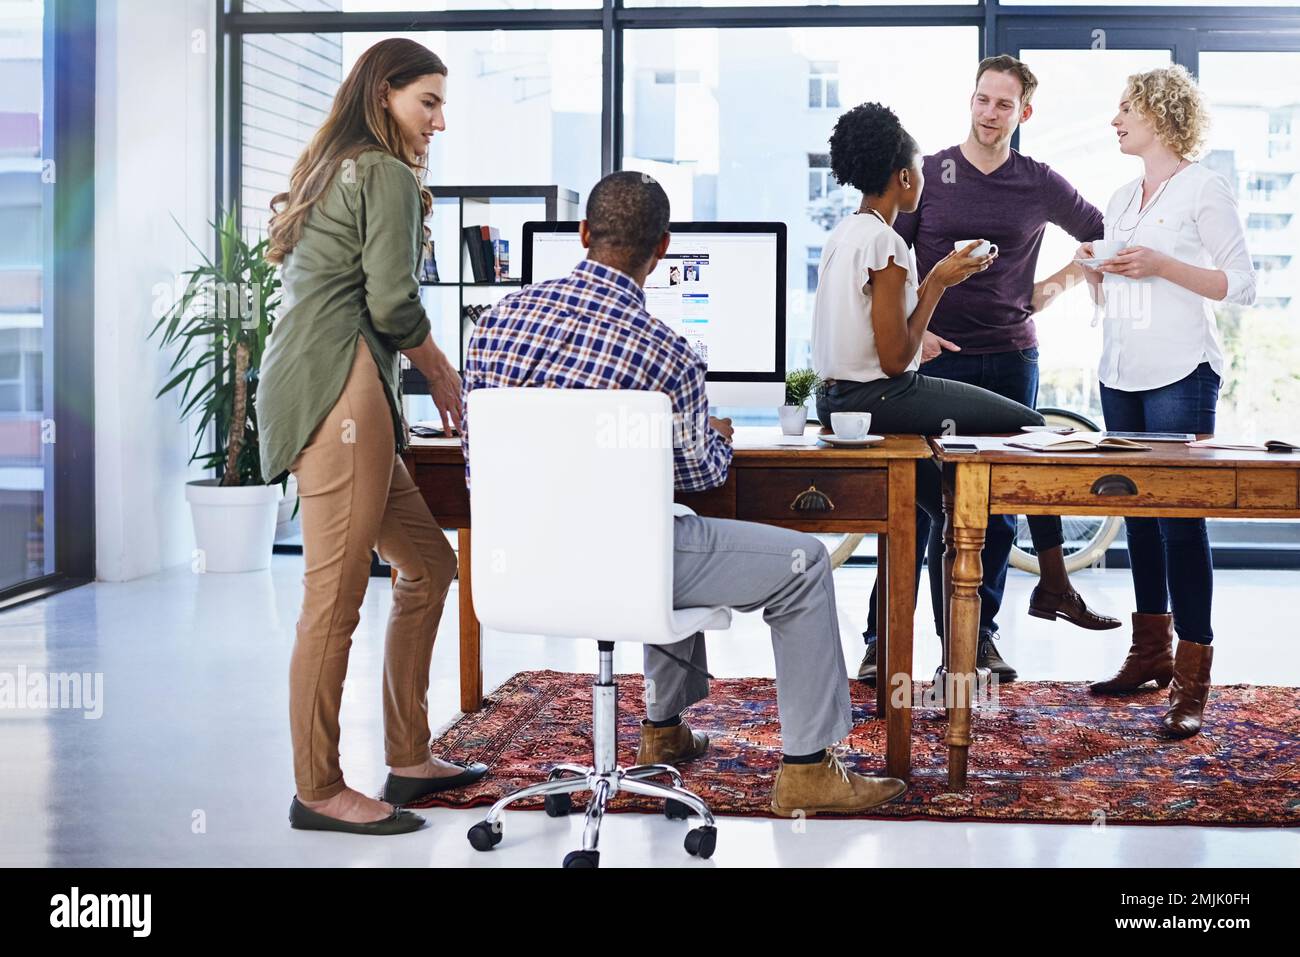 Its a casual but productive workplace. a team of designers working together in the office. Stock Photo